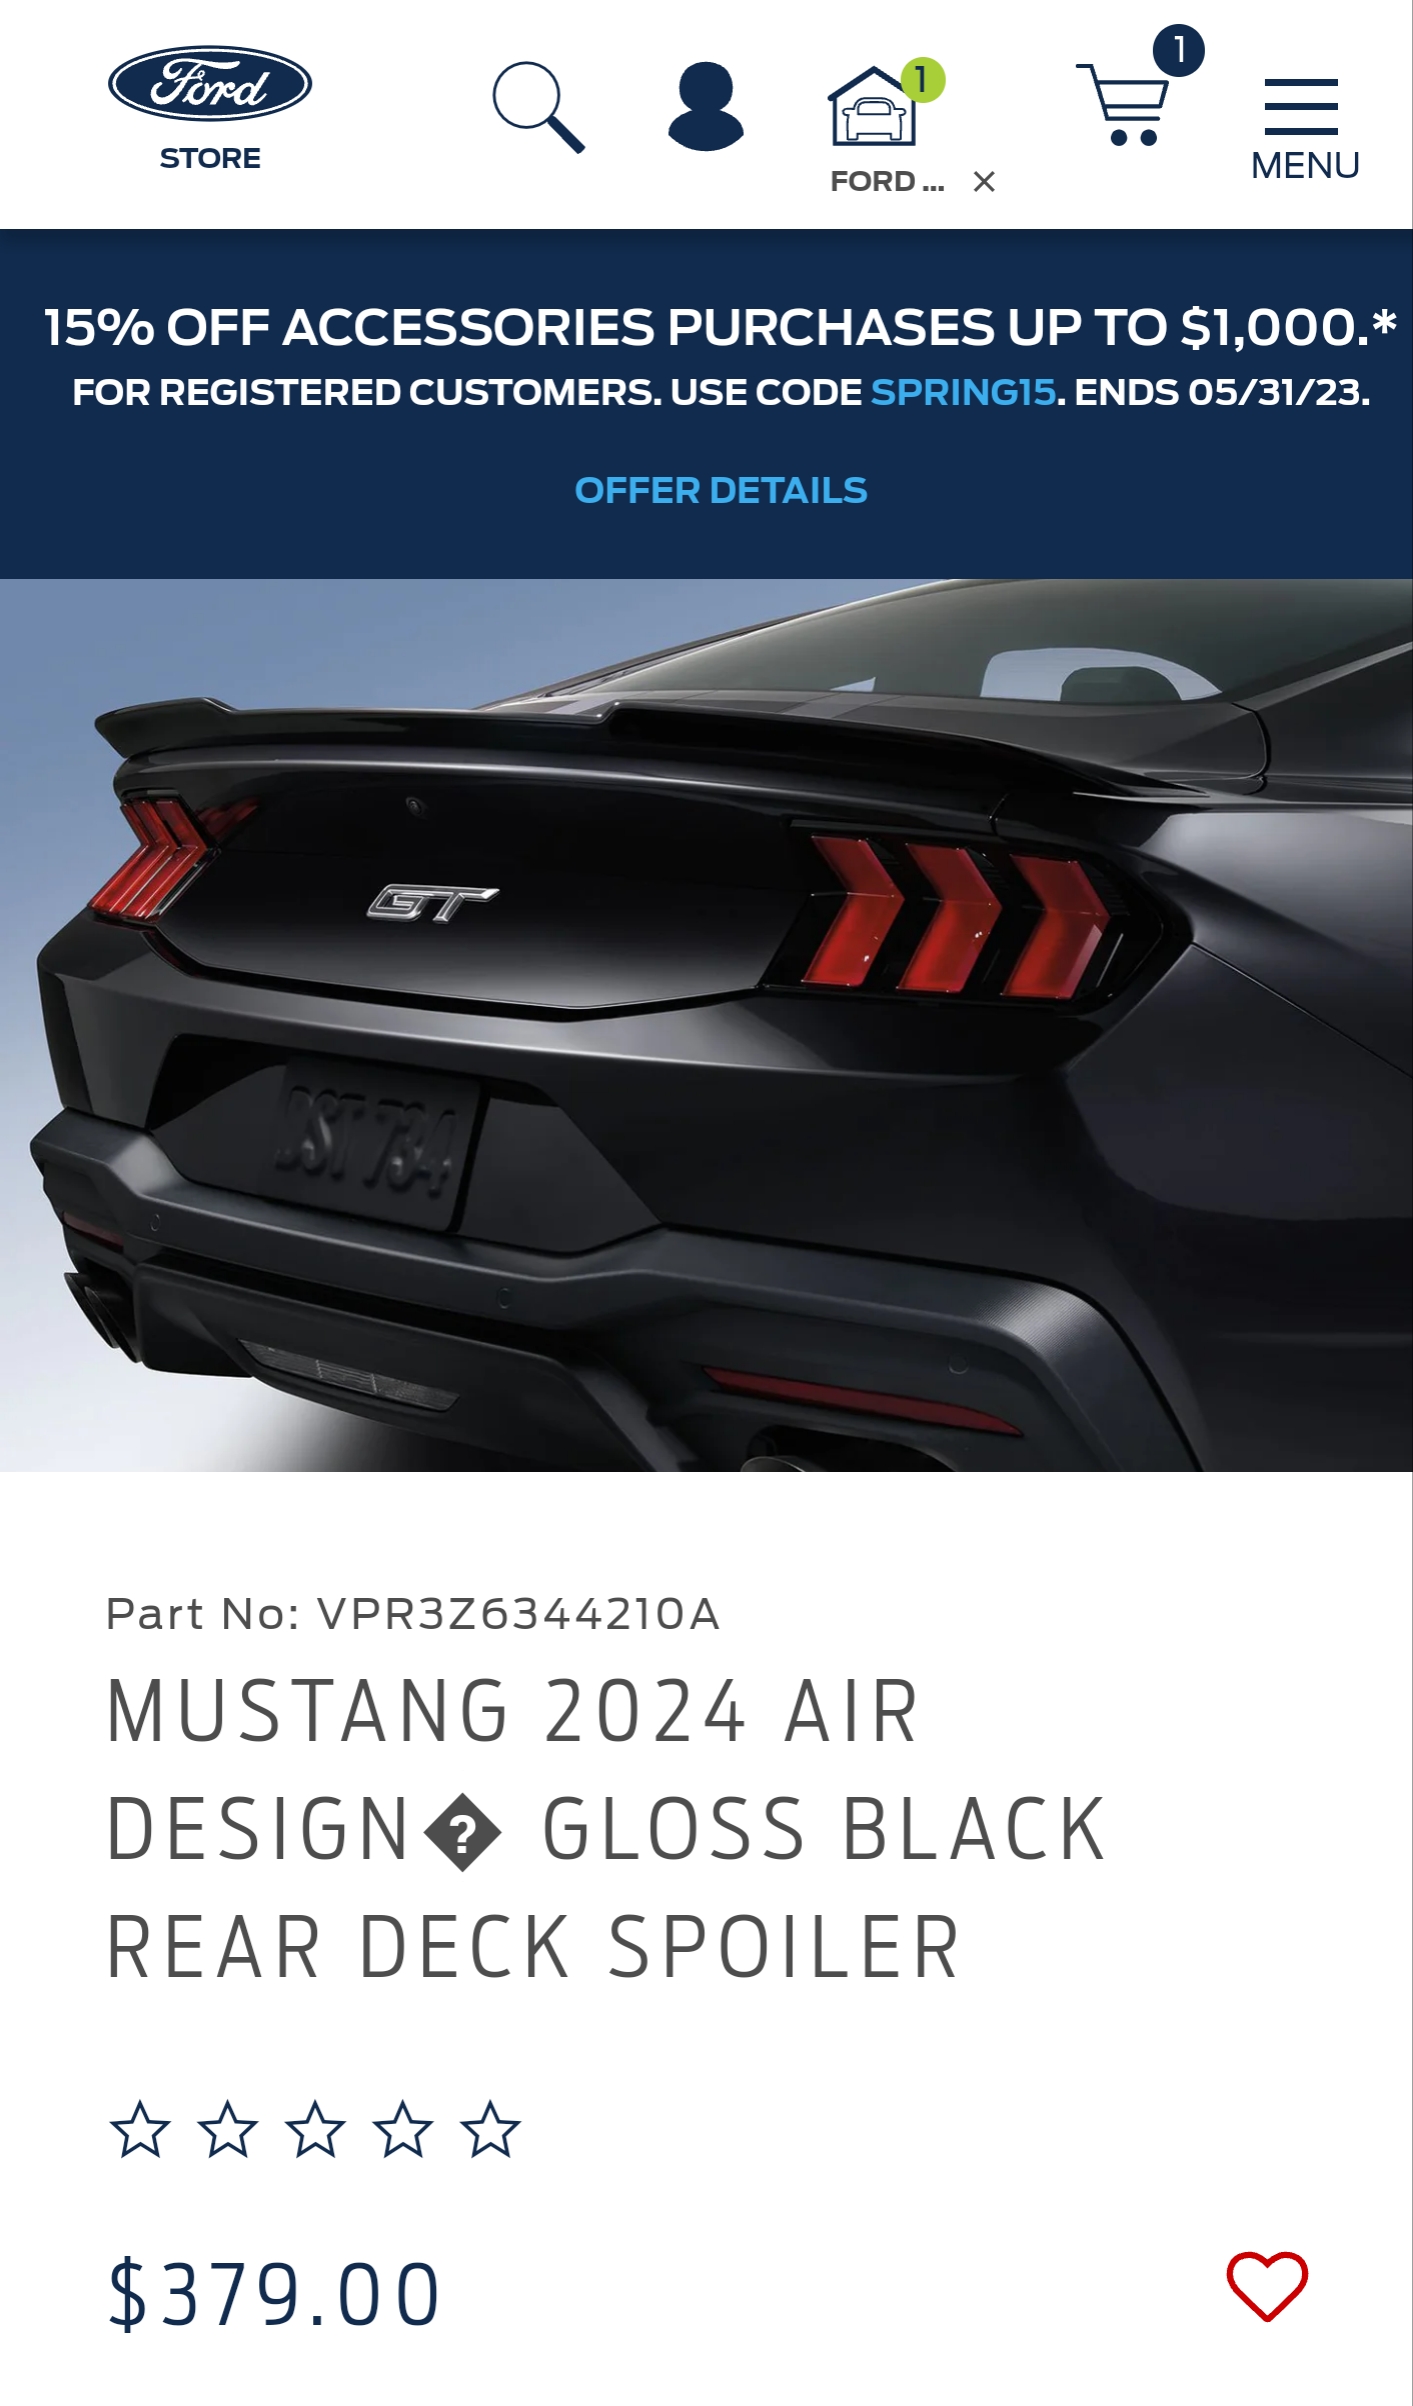 S650 Mustang Let's discuss the trunk wing (options) 2024 Mustang Rear Spoiler